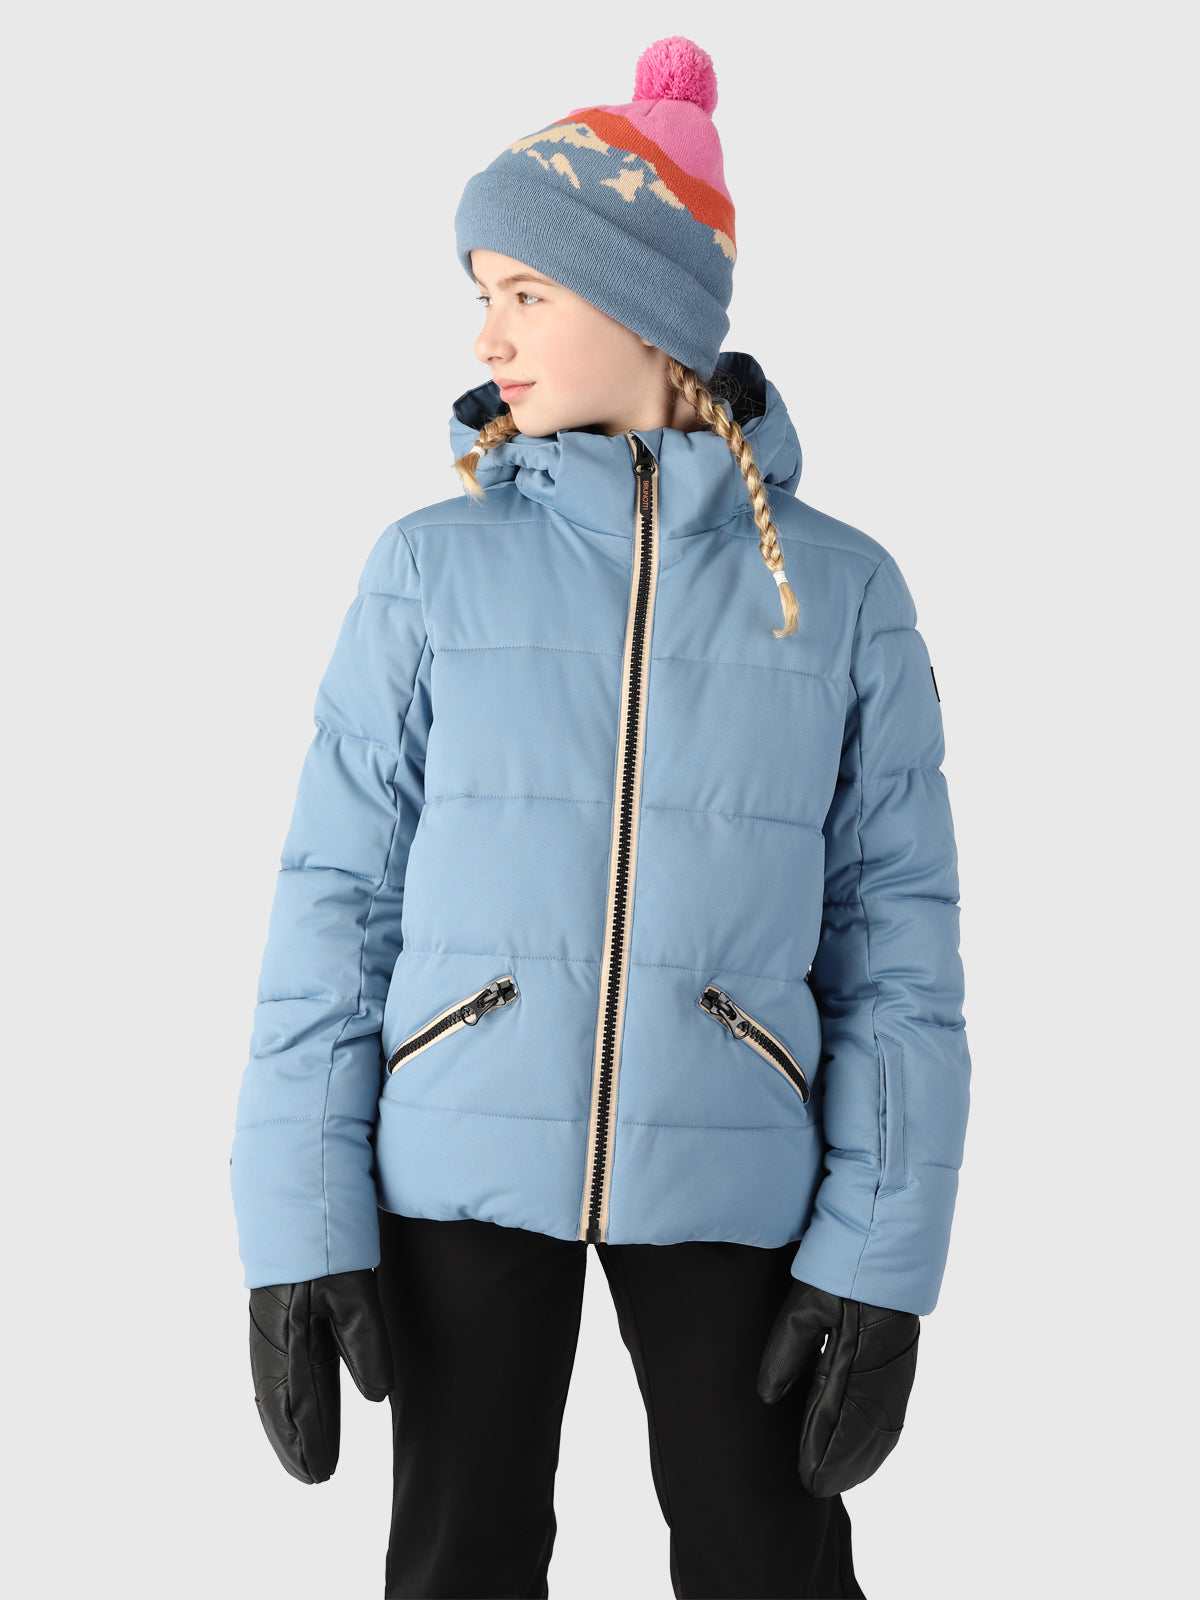 Brunotti Snow performance Jackets: Ski Kids High for Women, Men, Snowboard Jackets and and